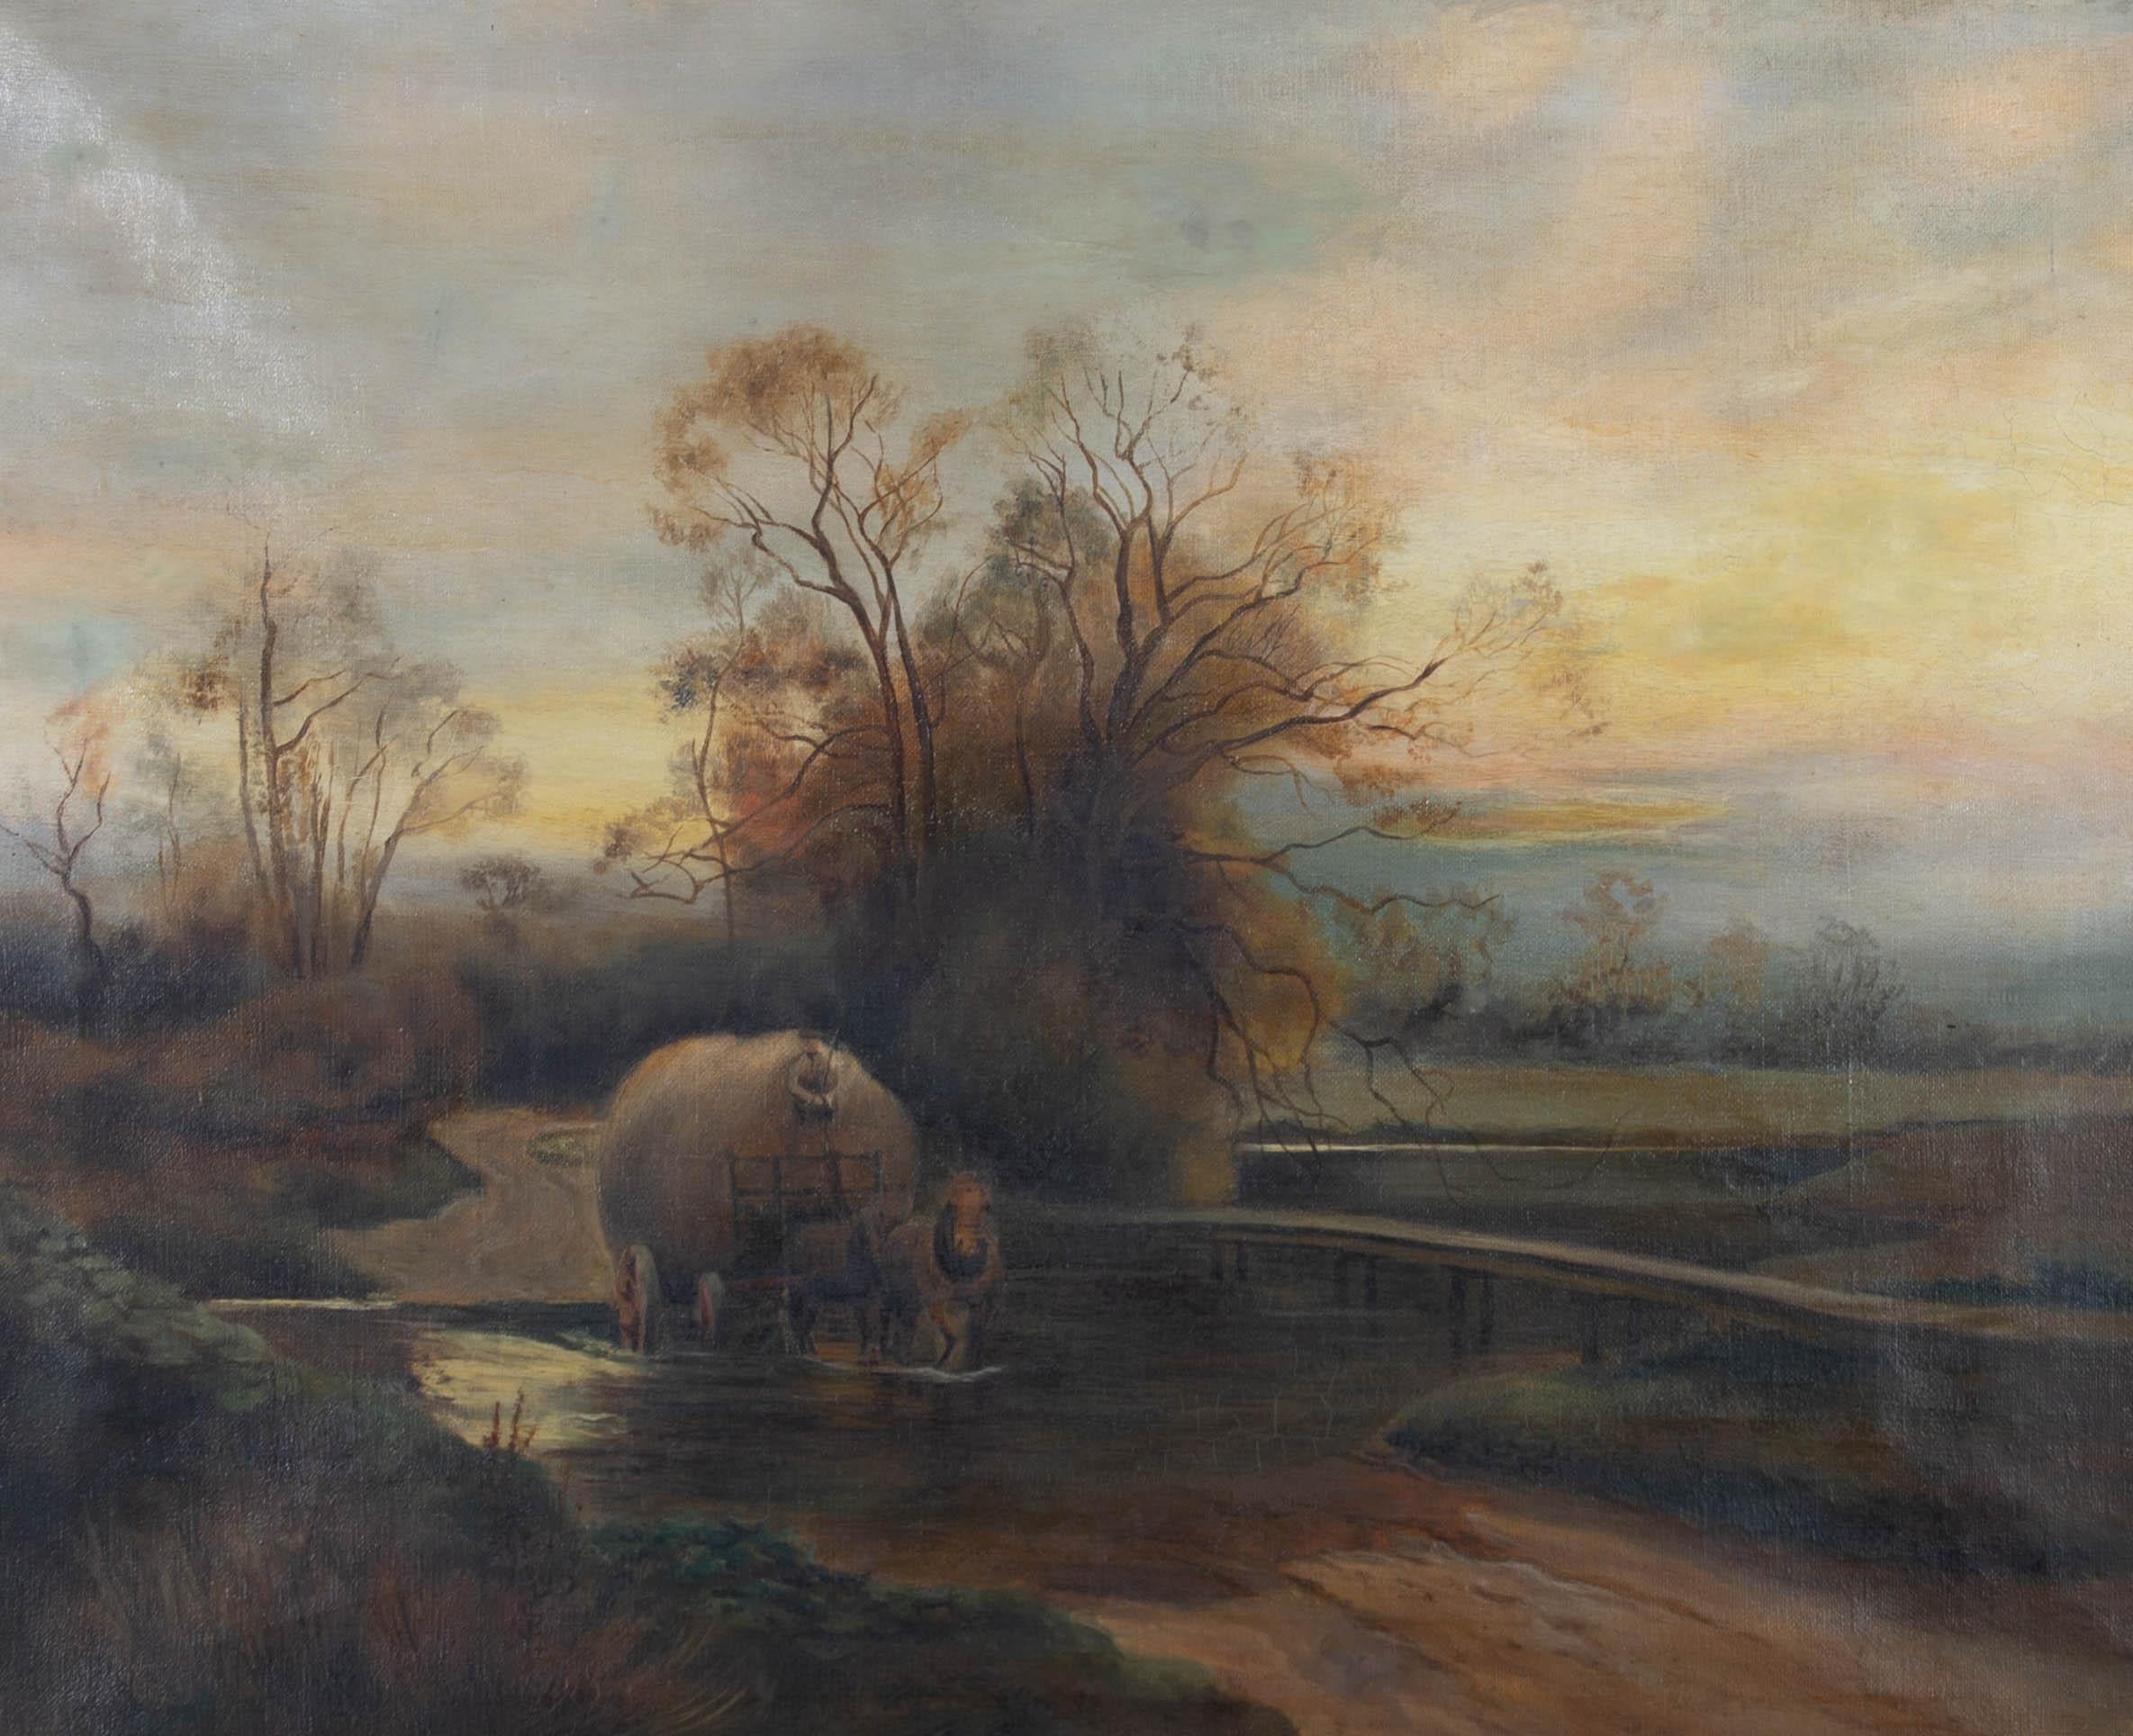 A charming oil painting, depicting a rural landscape scene with a hay wagon in a river. Signed to the lower right-hand corner. Presented in a distressed, ornate, gilt-effect frame, as shown. On canvas on stretchers.